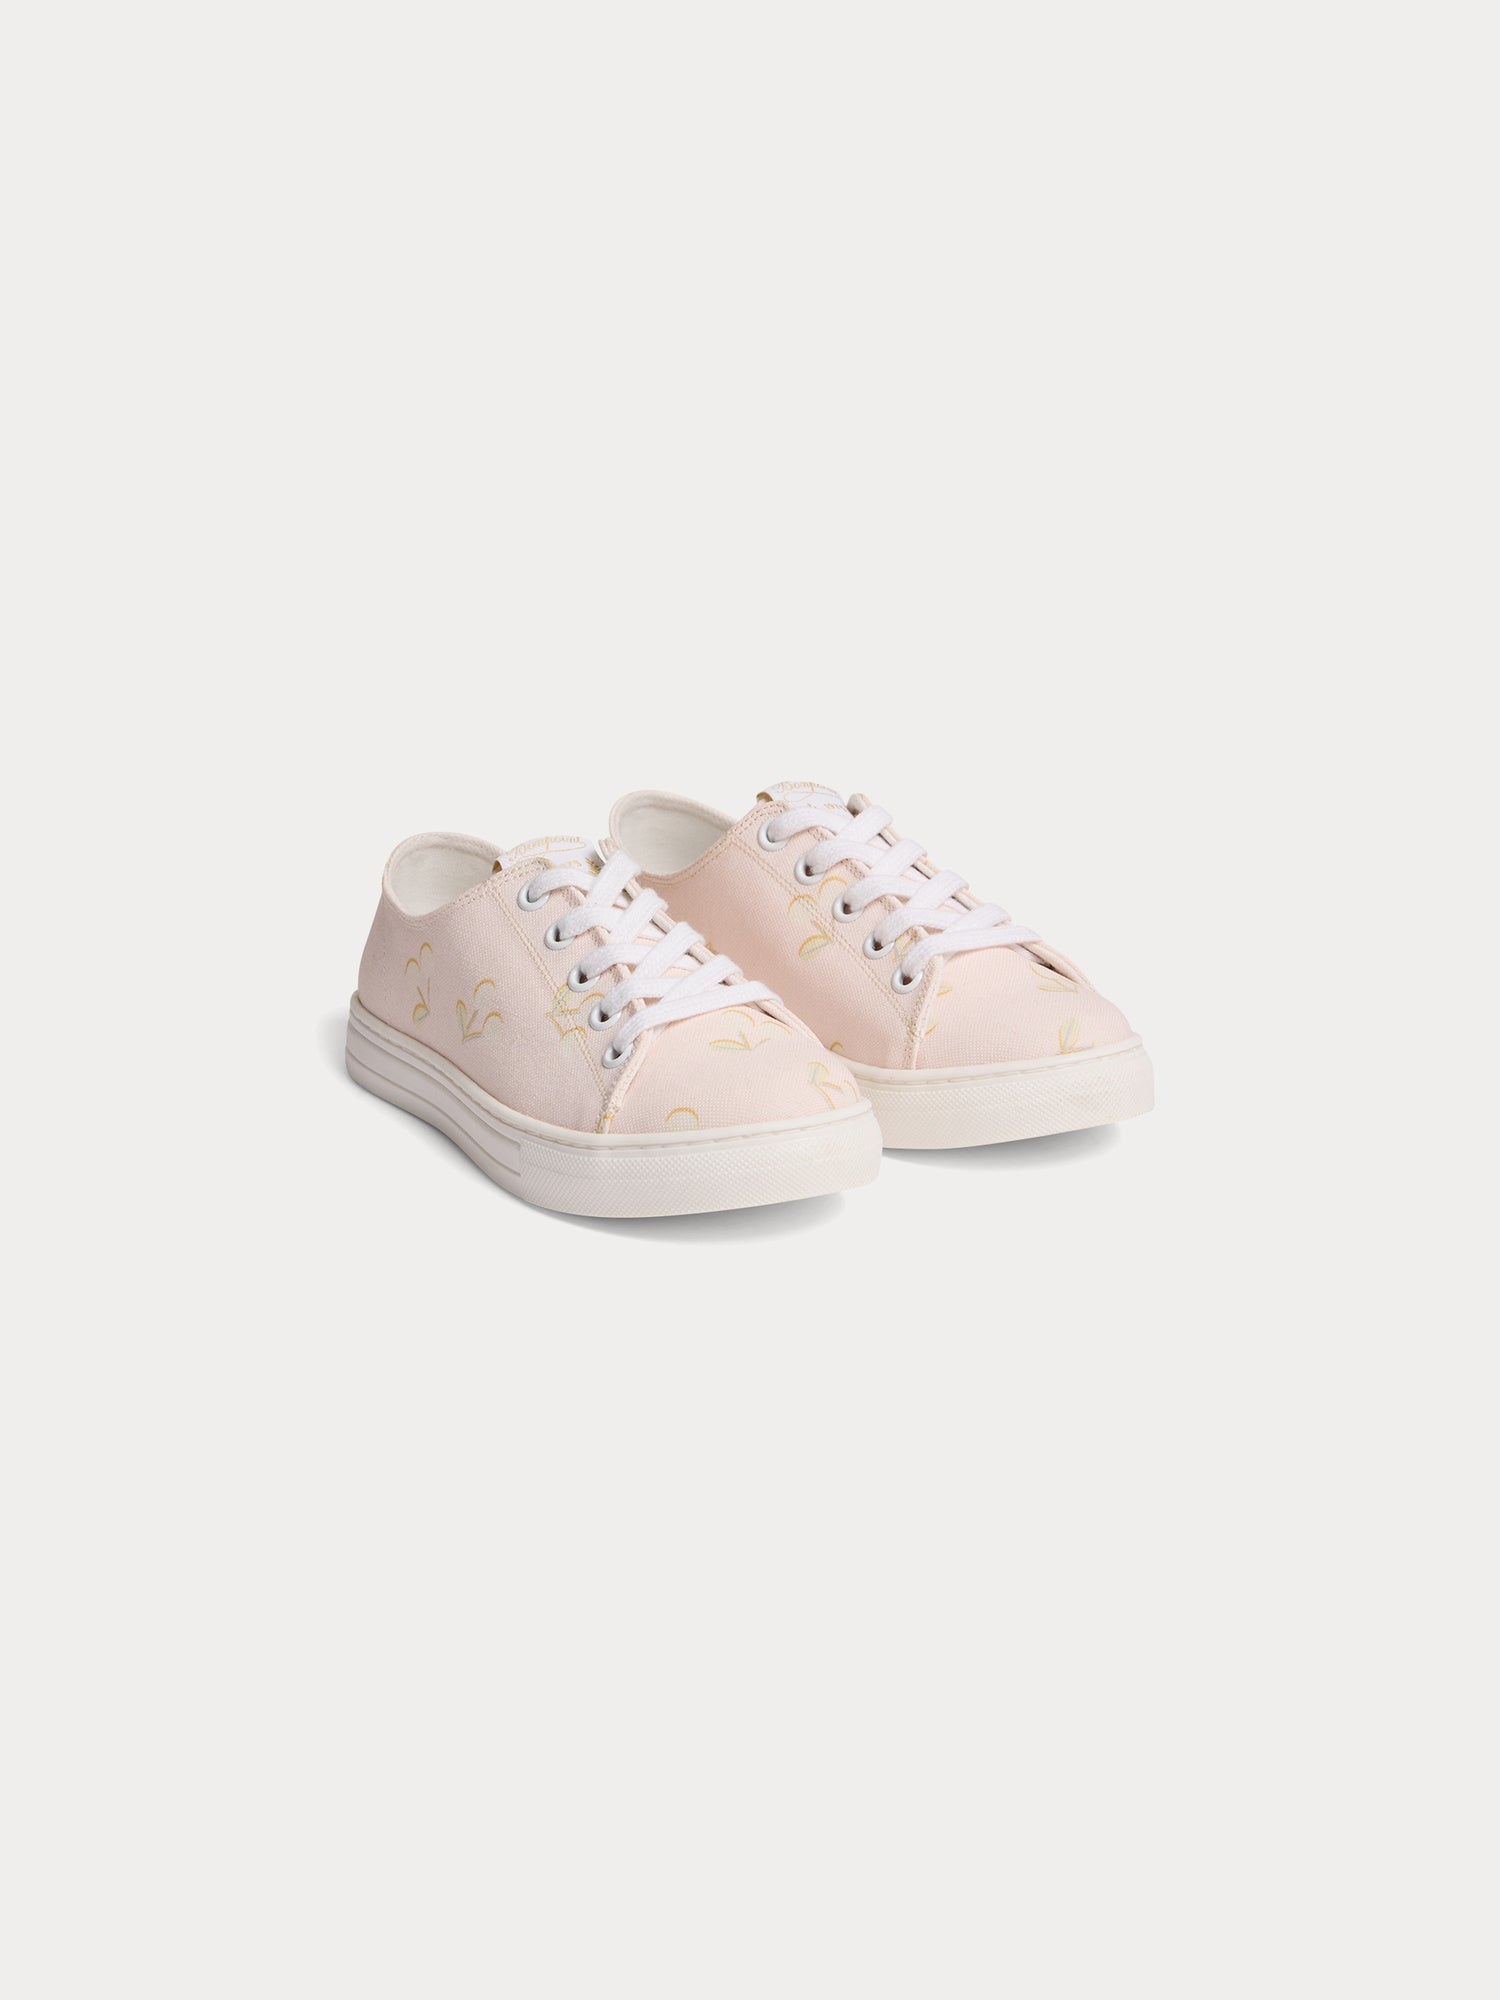 Girls Pink Canvas Shoes